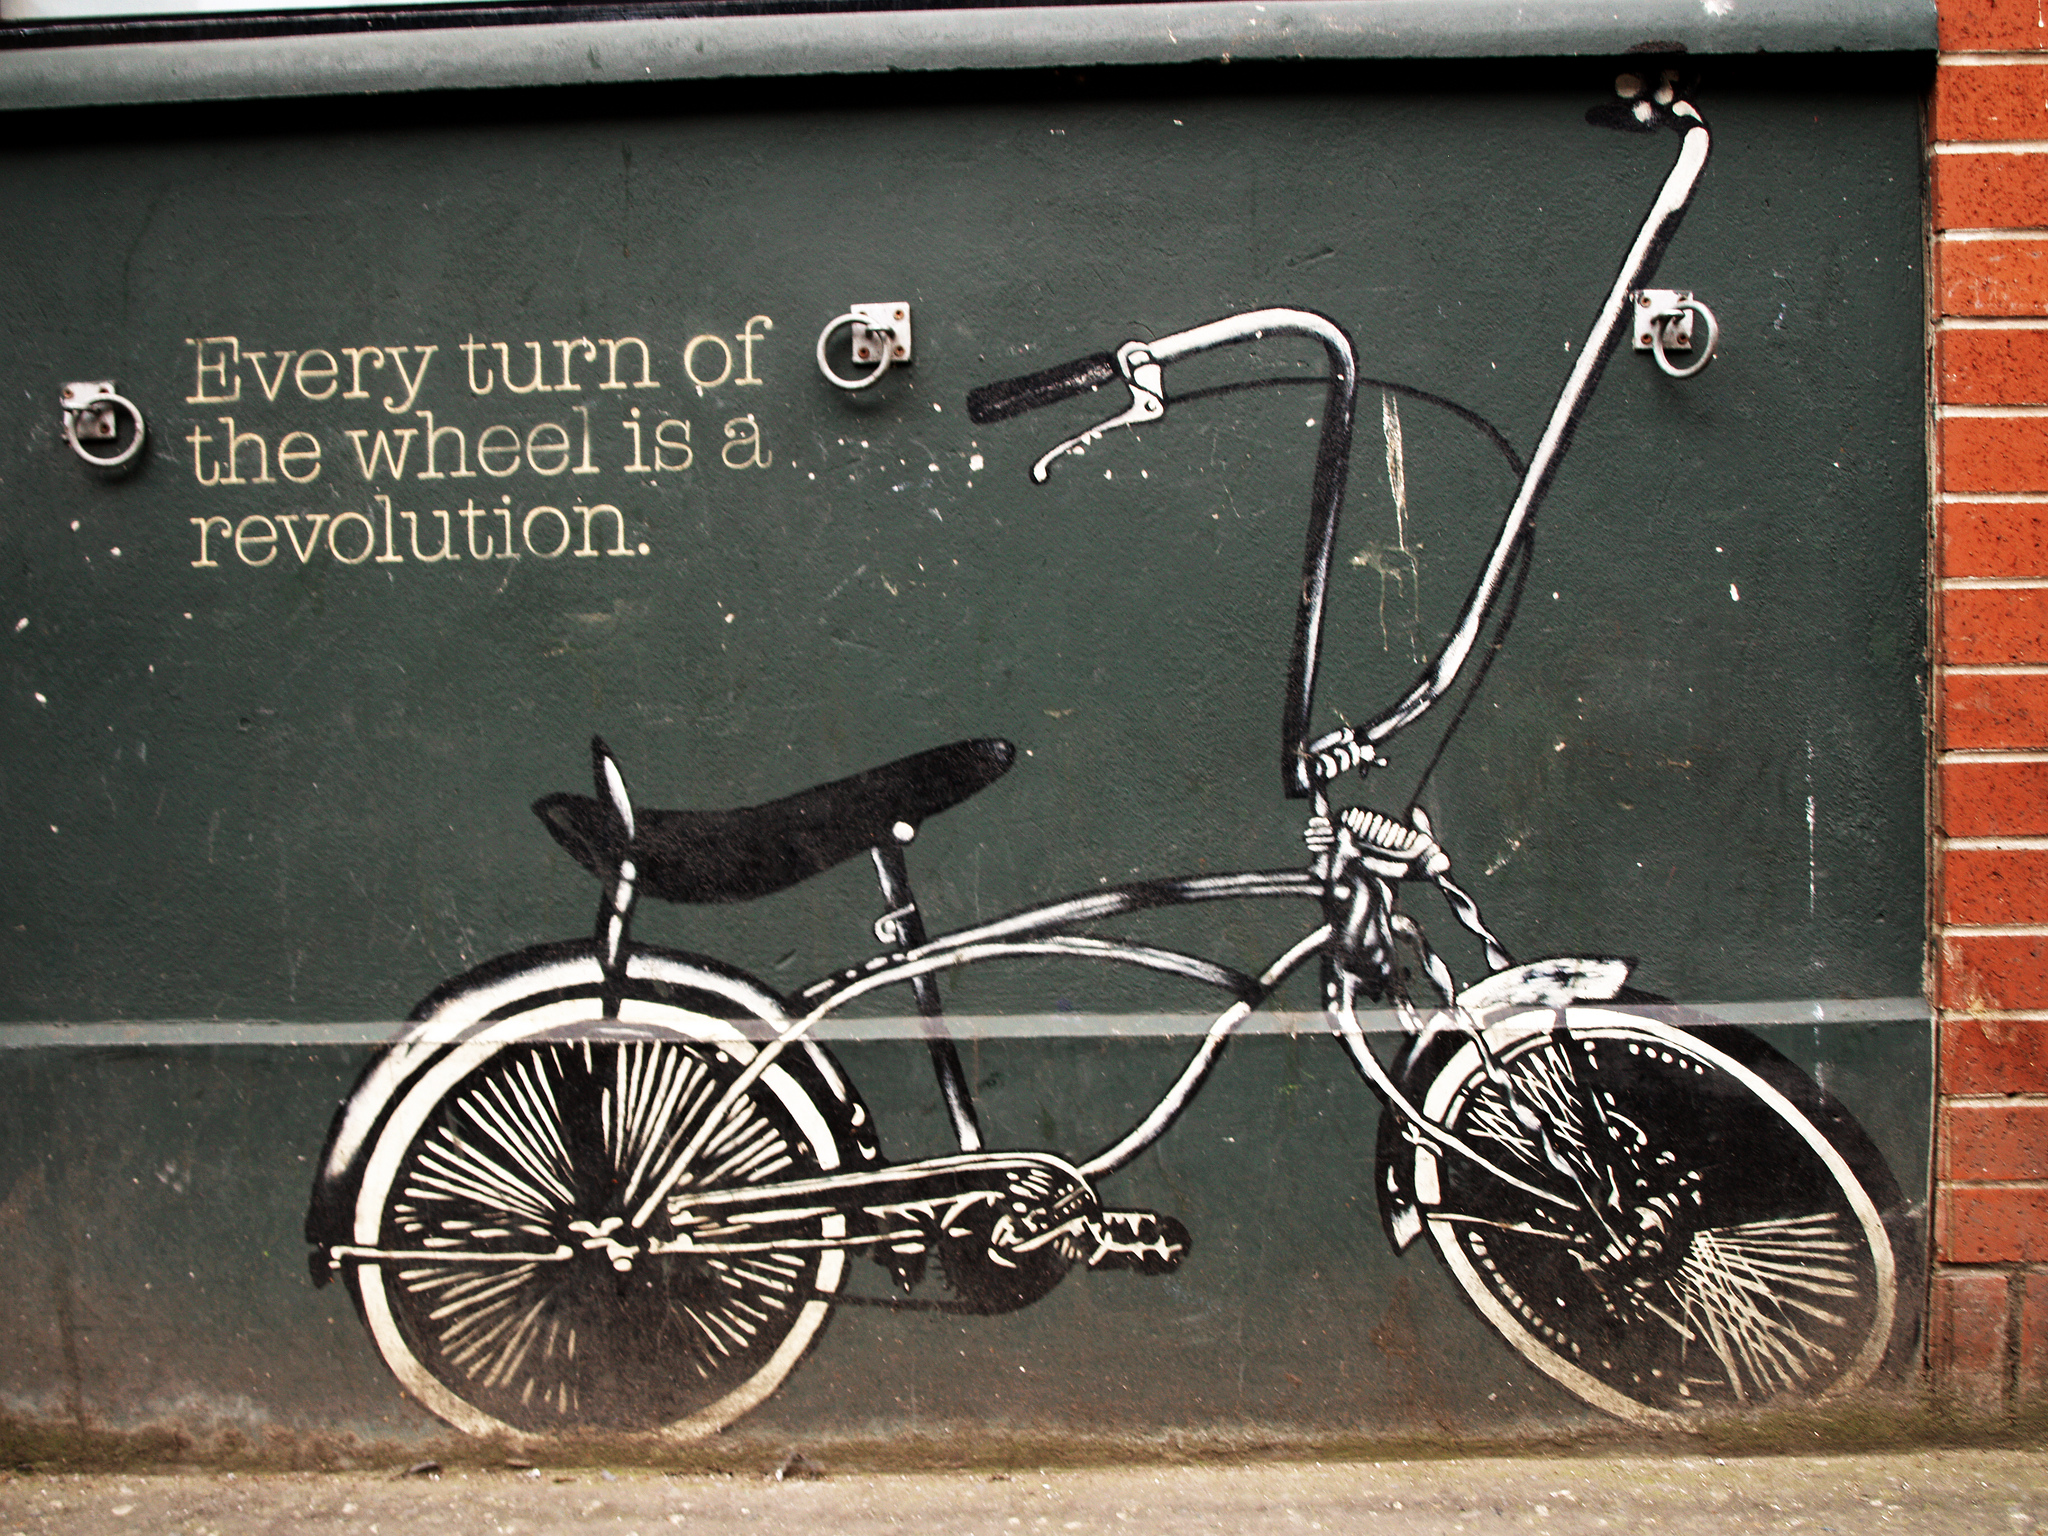 The bicycle revolution is on the up in Belfast and every turn of the wheel counts (Photo: Perica/Flickr)